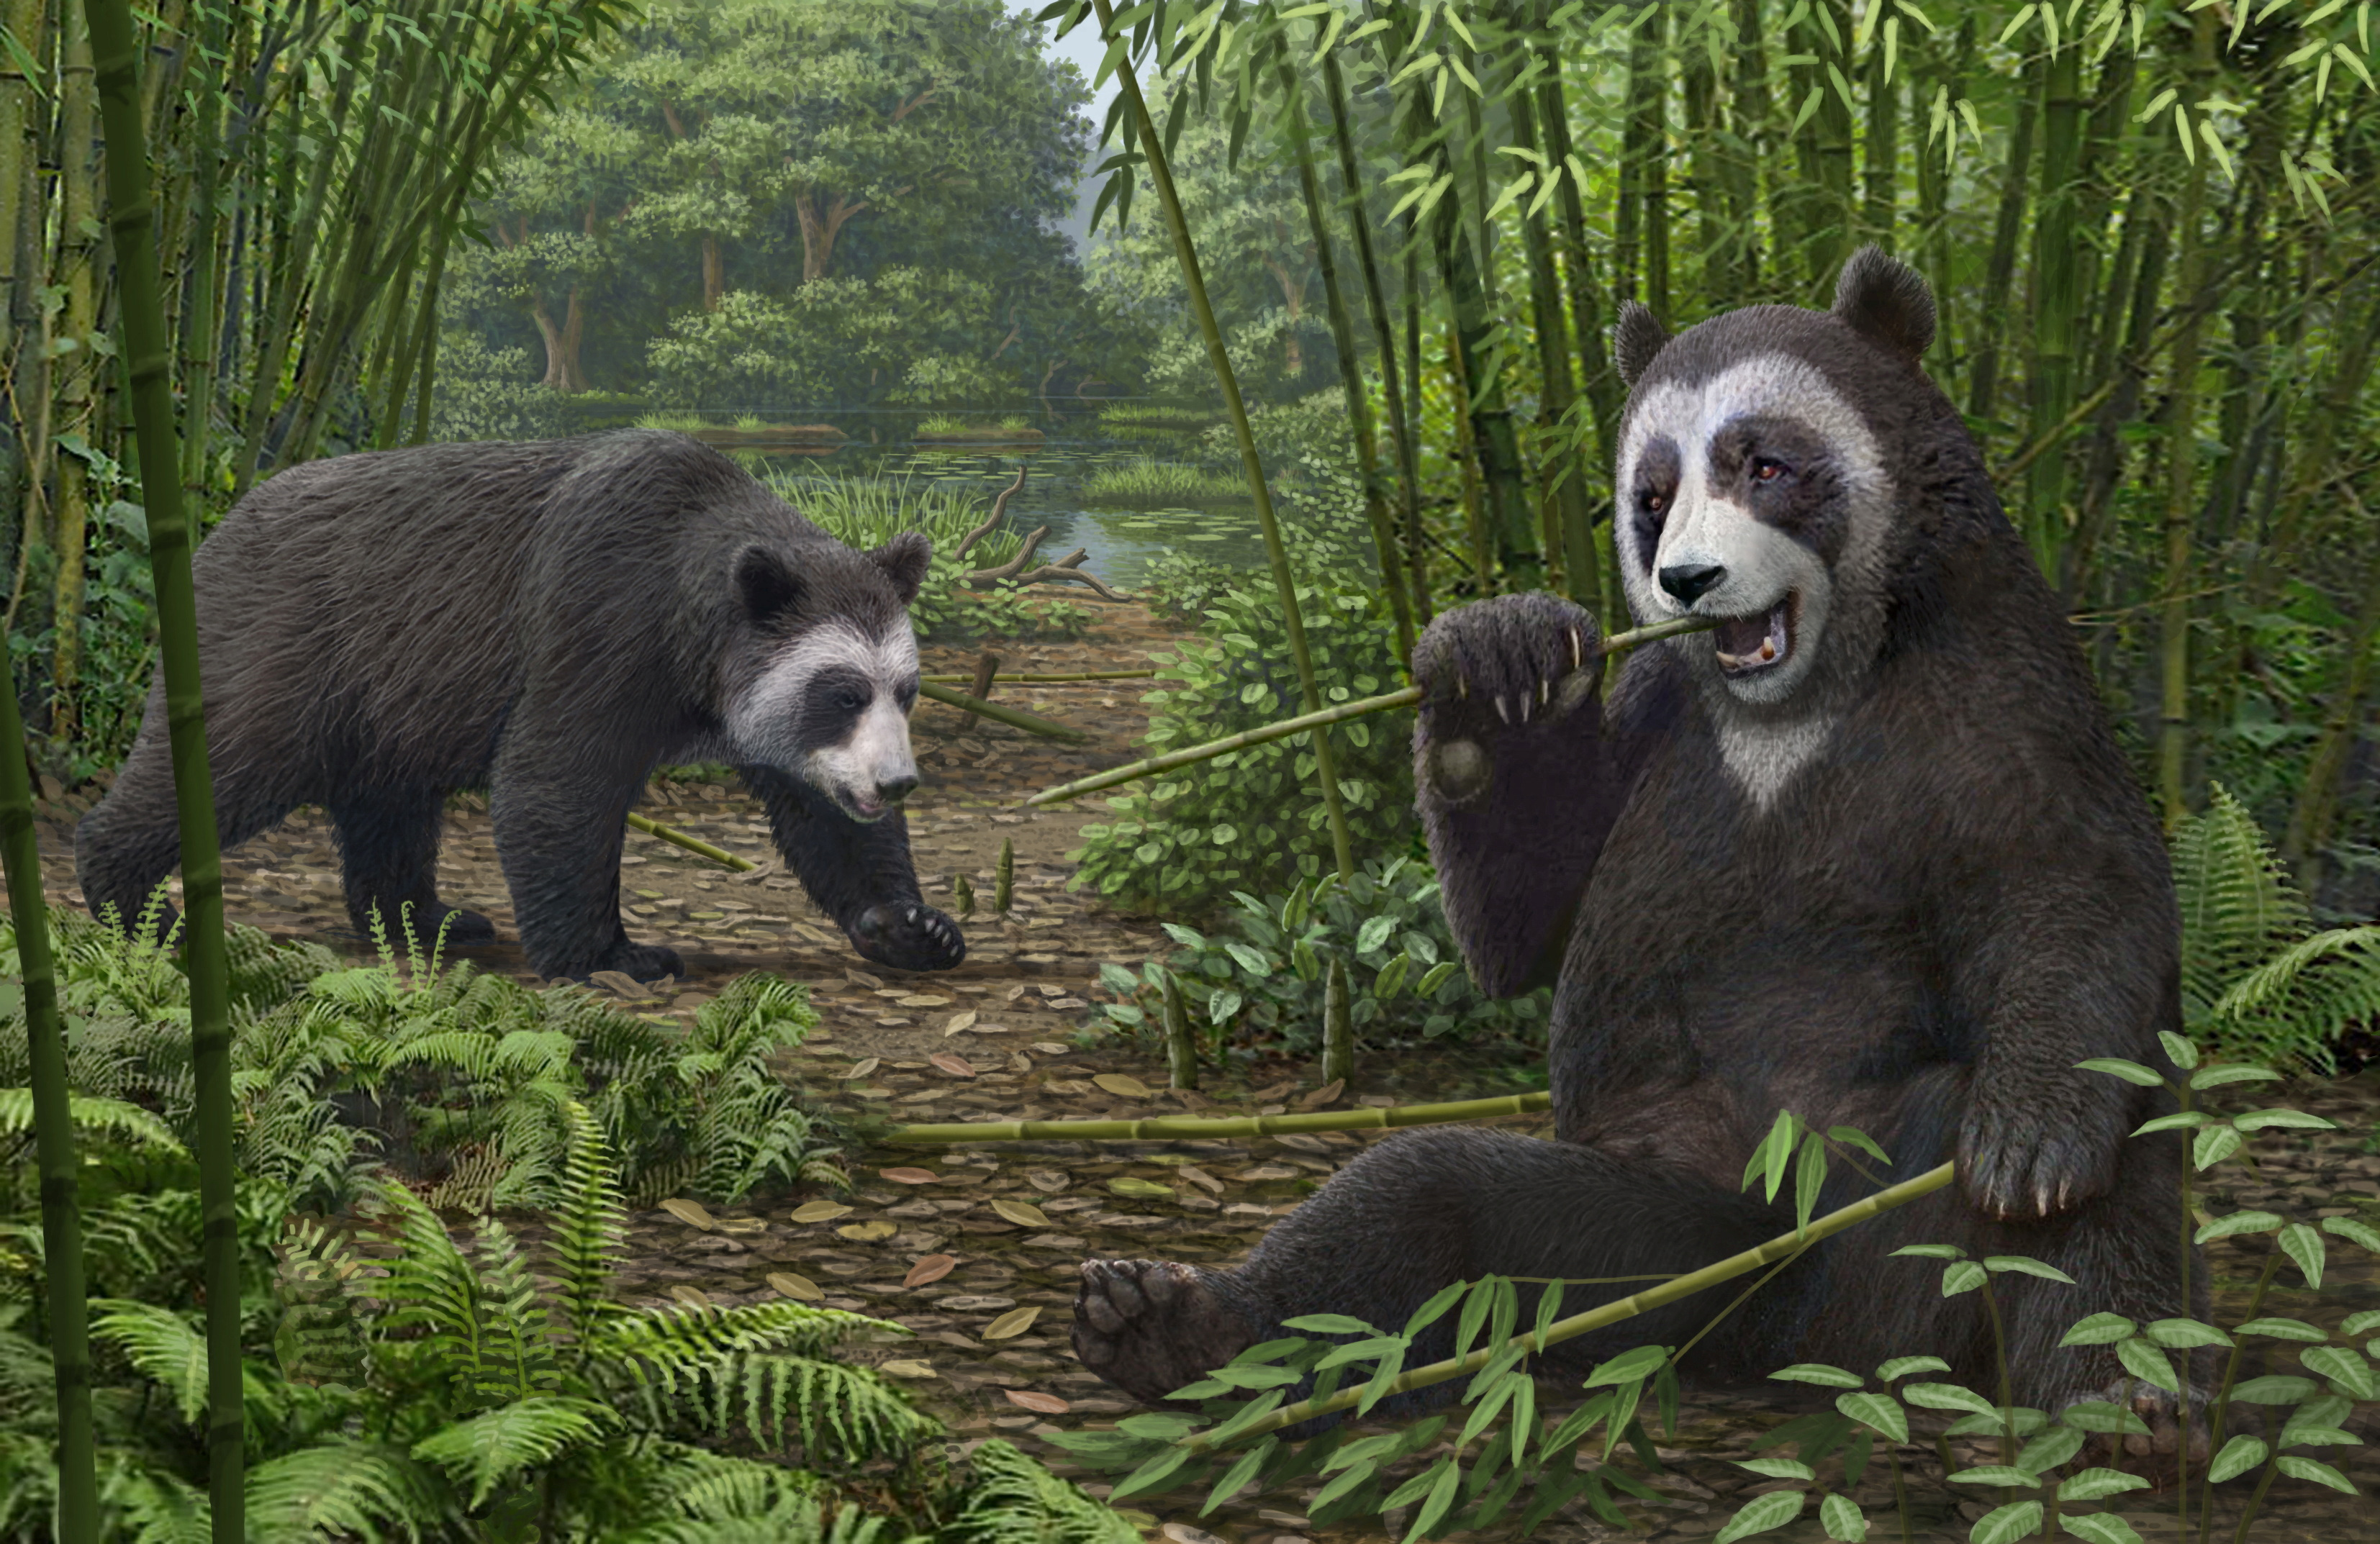 An artist's reconstruction of the extinct panda Ailurarctos that lived about 6 million years ago, with its fossils unearthed near the city of Zhaotong in northern China's Yunnan province, in this undated illustration.  Mauricio Anton/Handout via REUTERS 